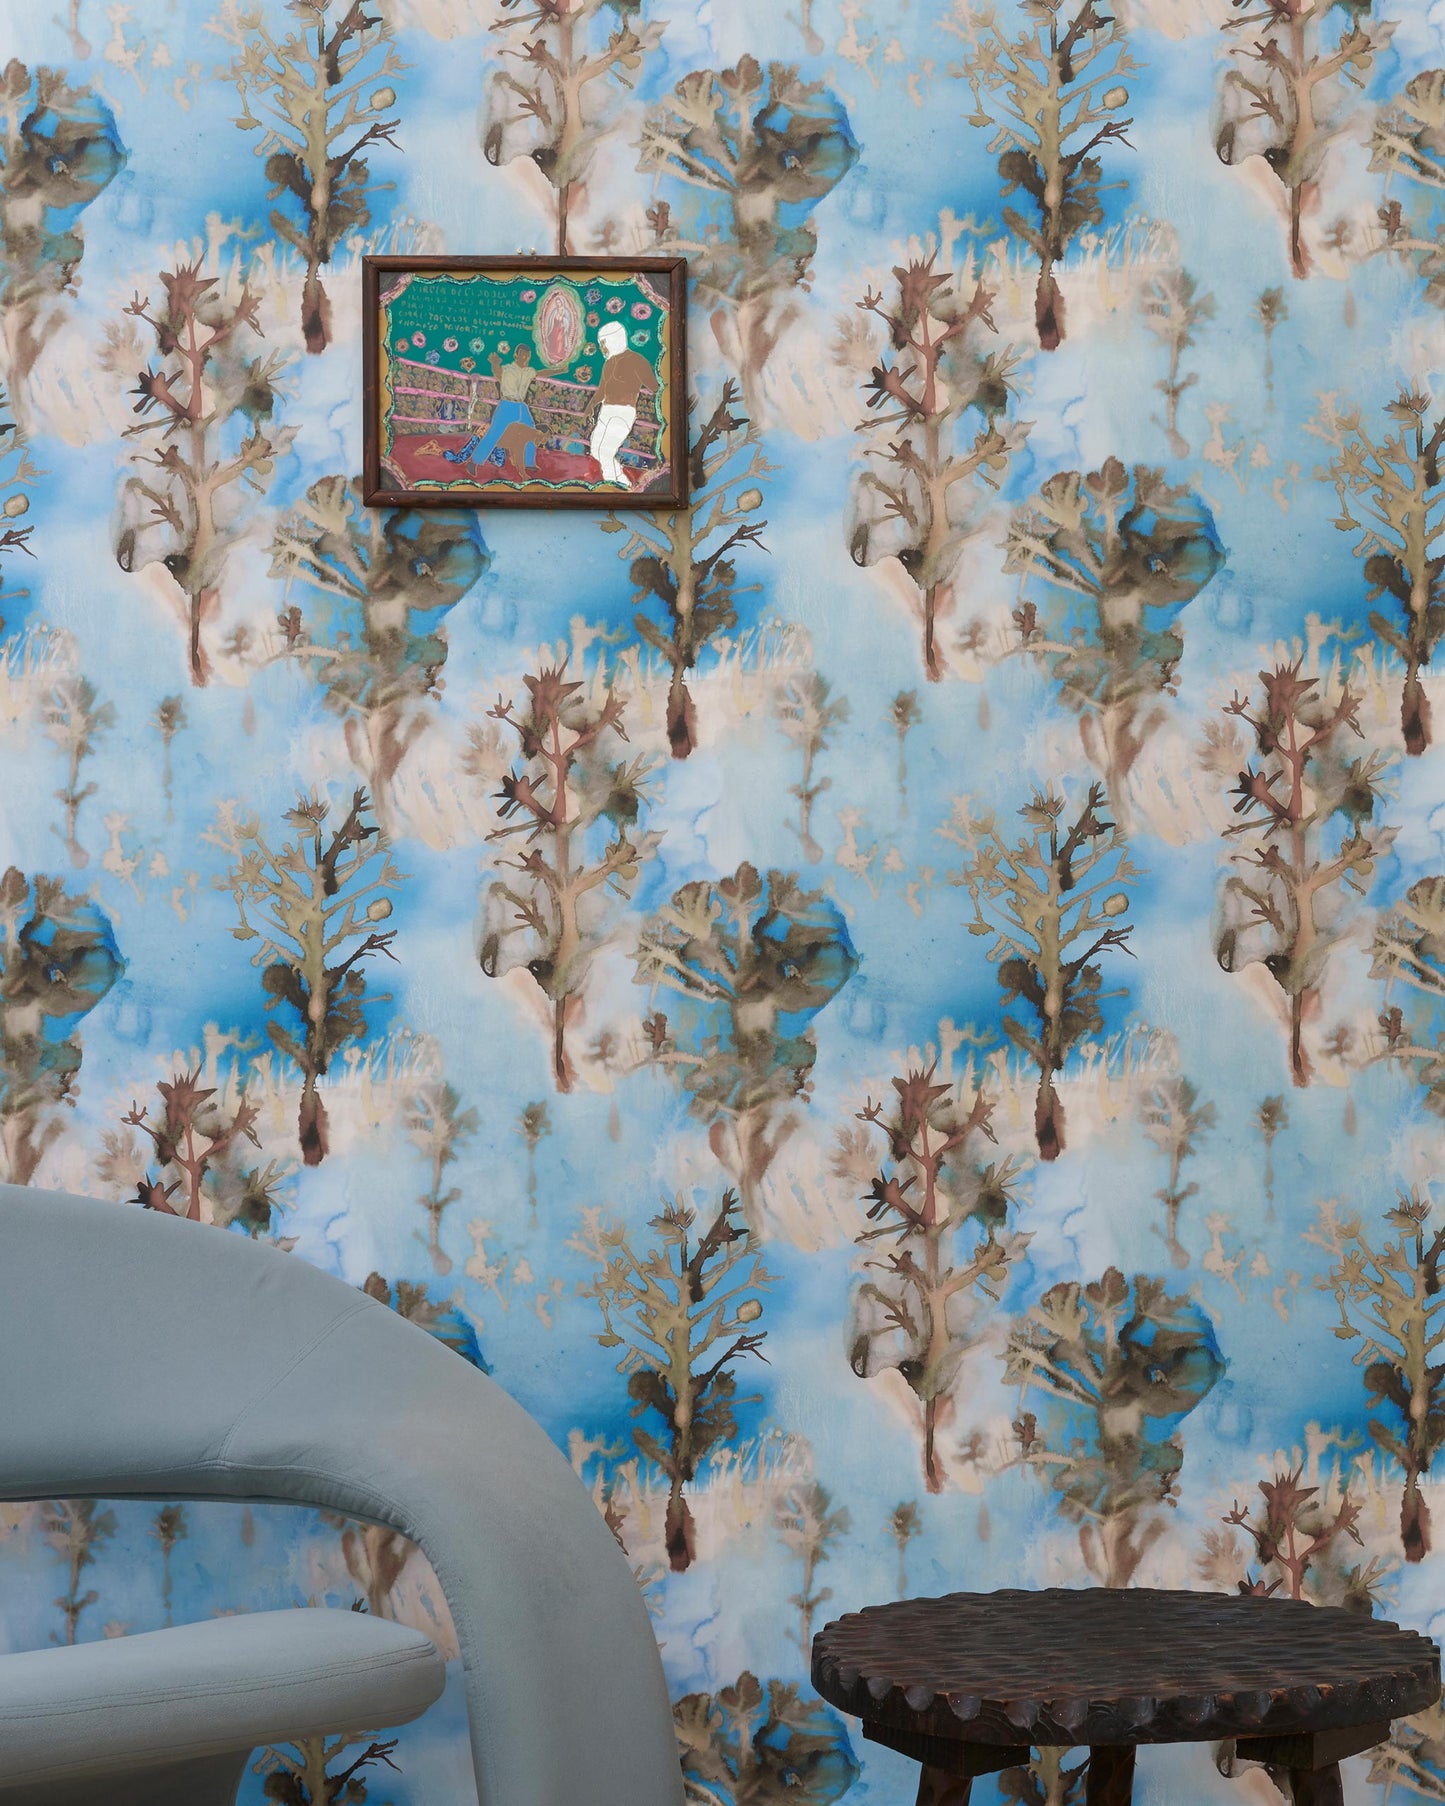 A chair in front of a wall with Aionas Wallpaper Morea